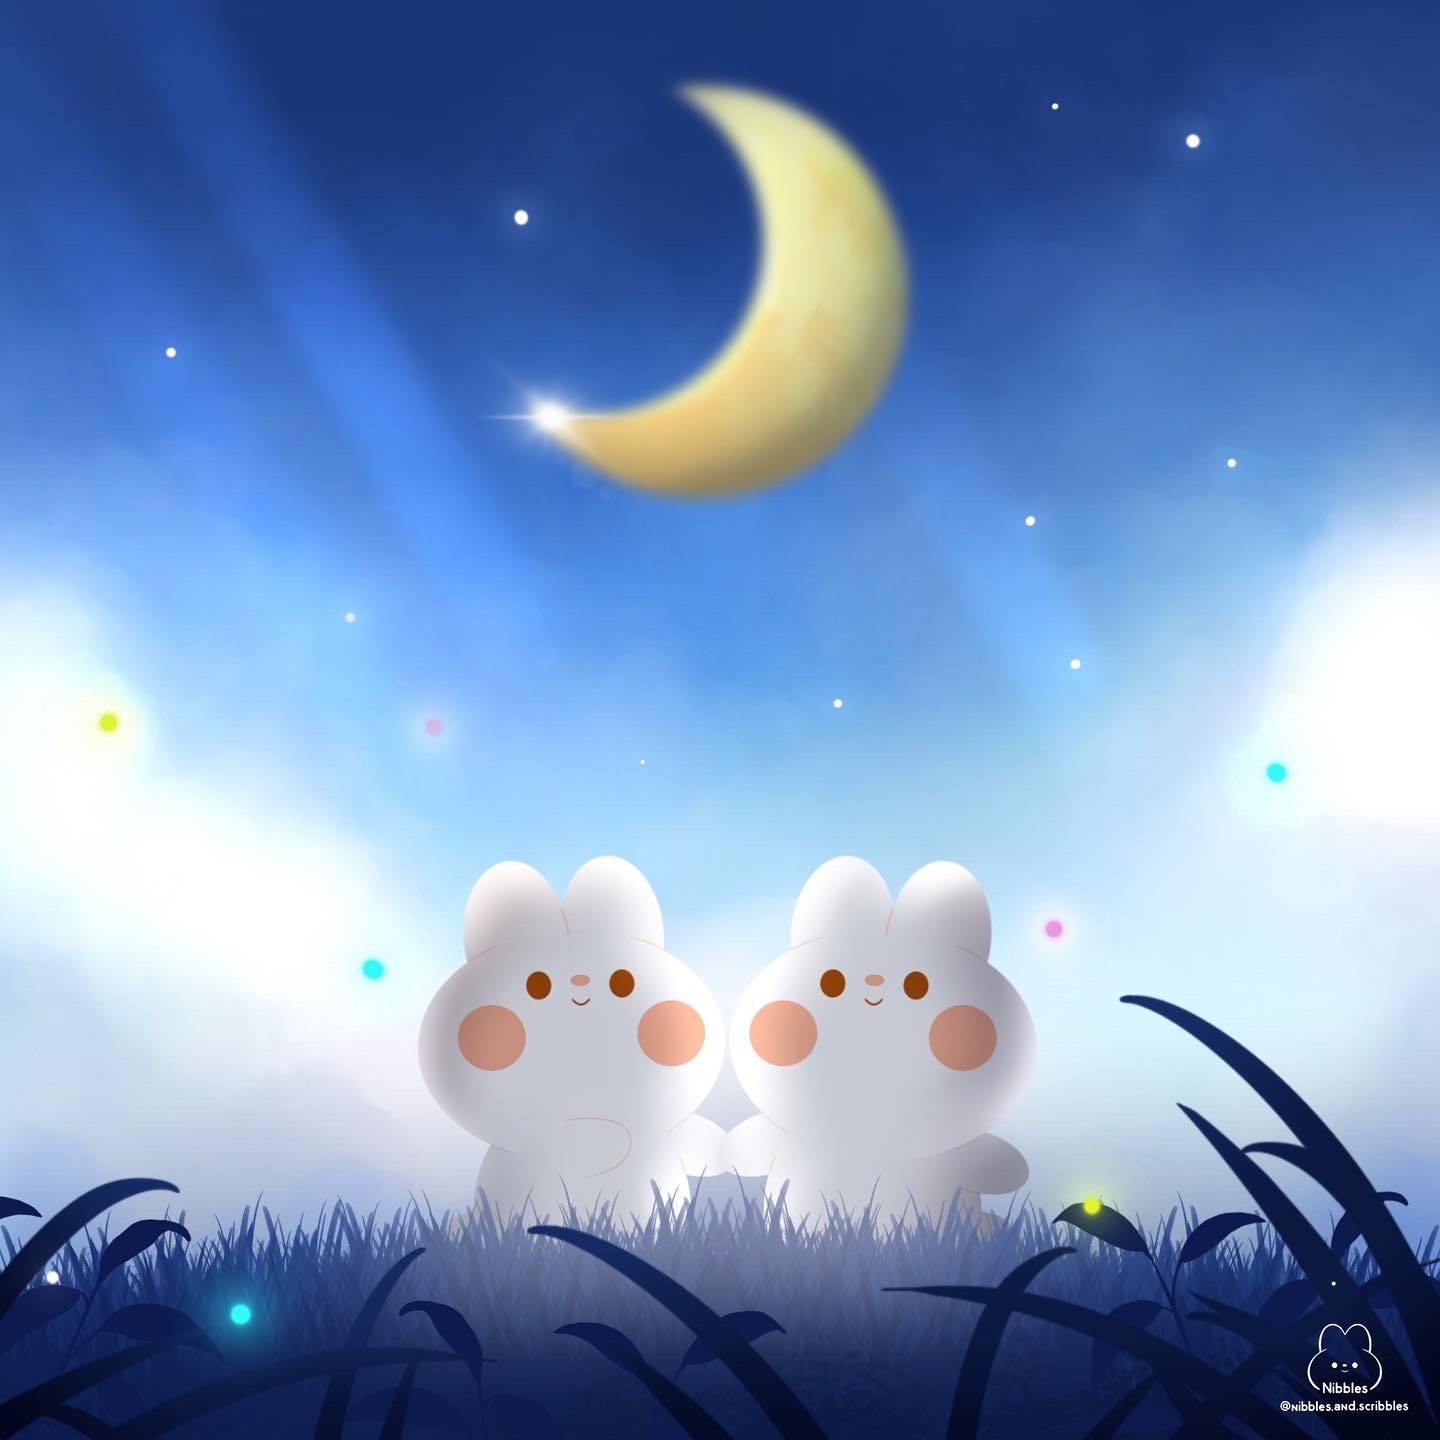 Together under the moonlight 🌙